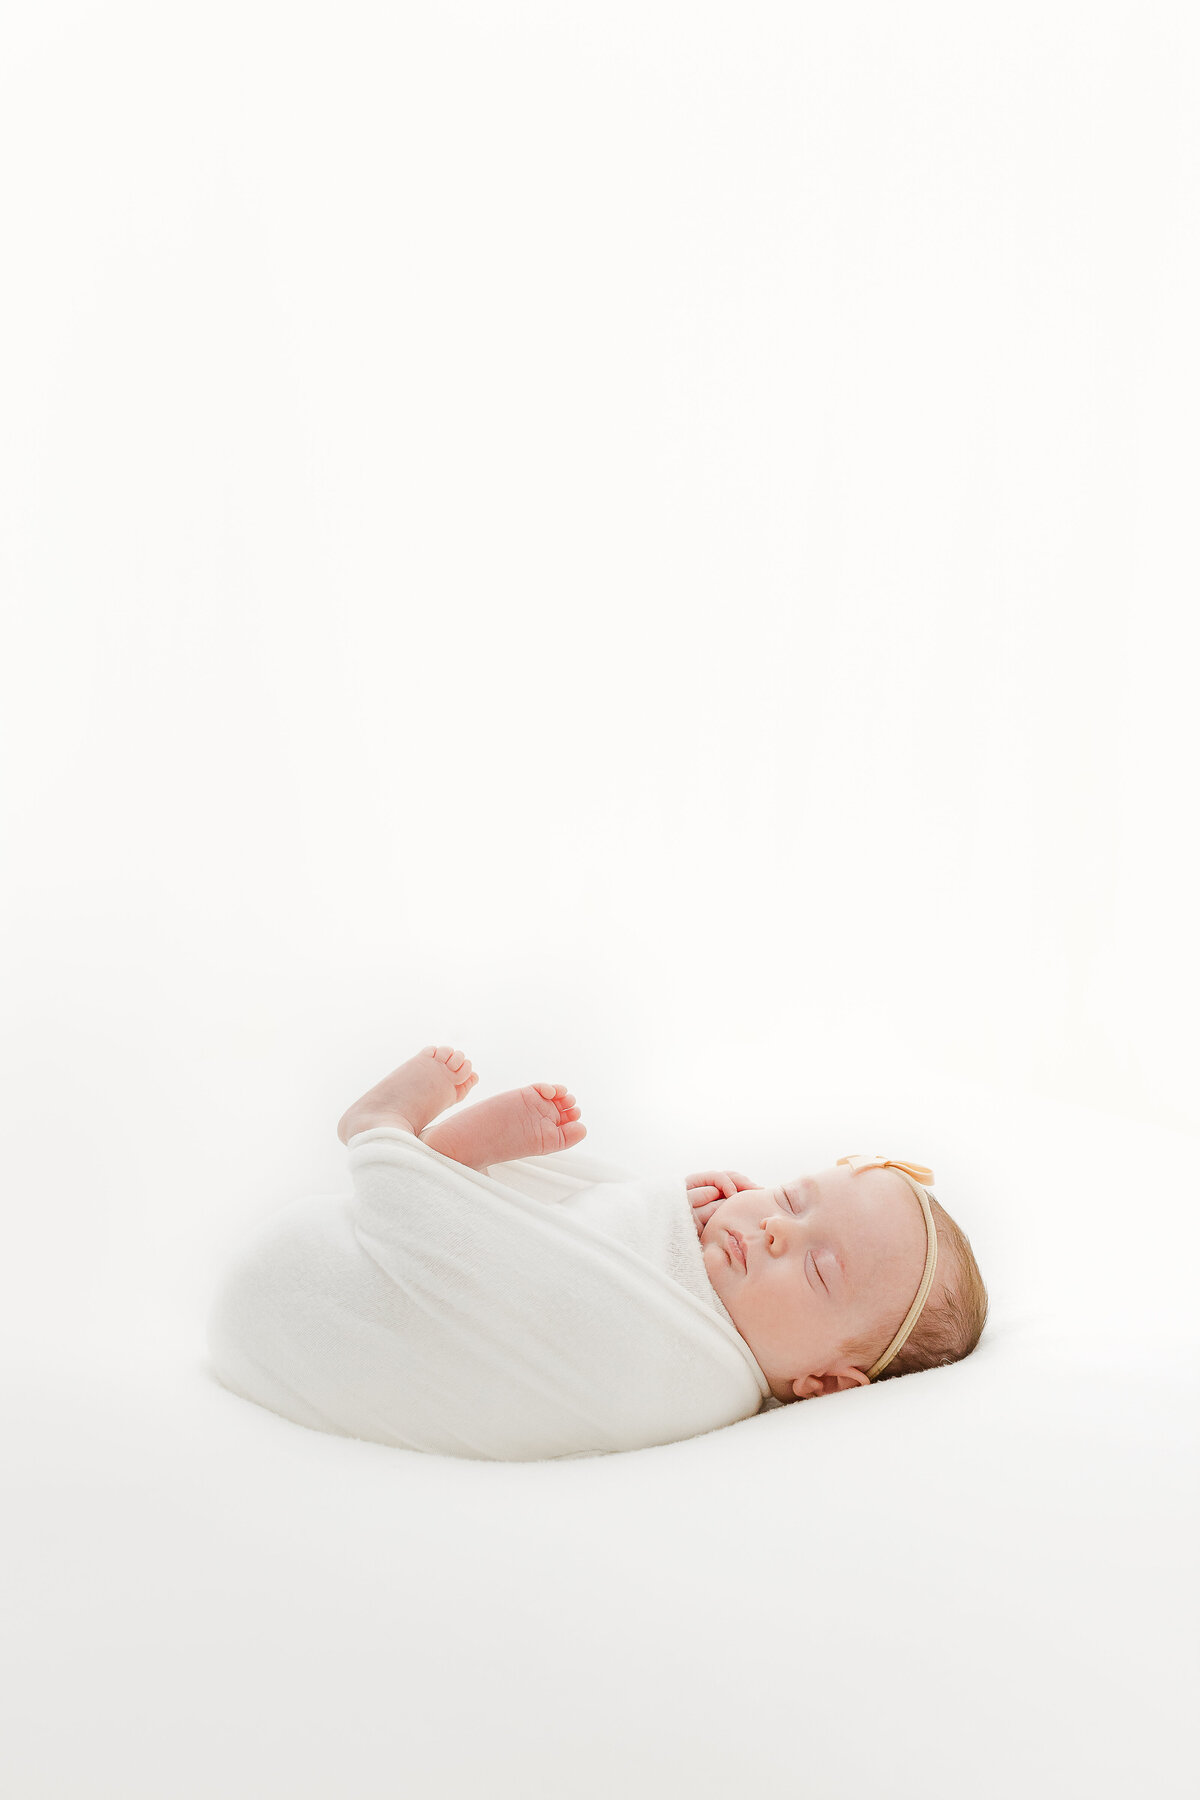 A DC newborn photography photo of a swaddled newborn baby girl in a white blanket with her feet sticking out